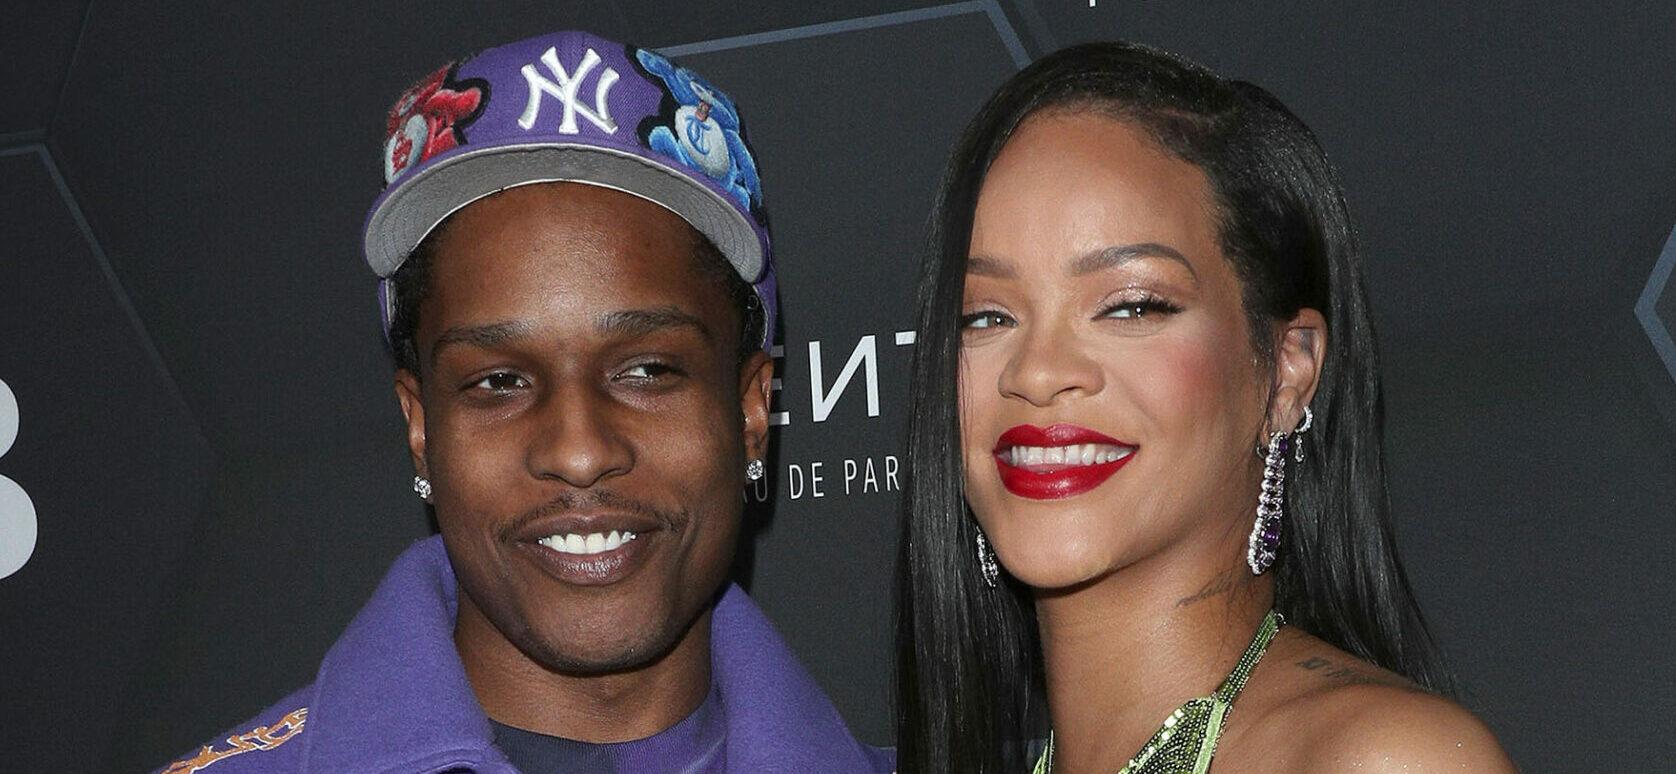 Rihanna Gushes About ‘Undeniable’ Bond Between Son & A$AP Rocky: ‘I’m On The Sidelines’